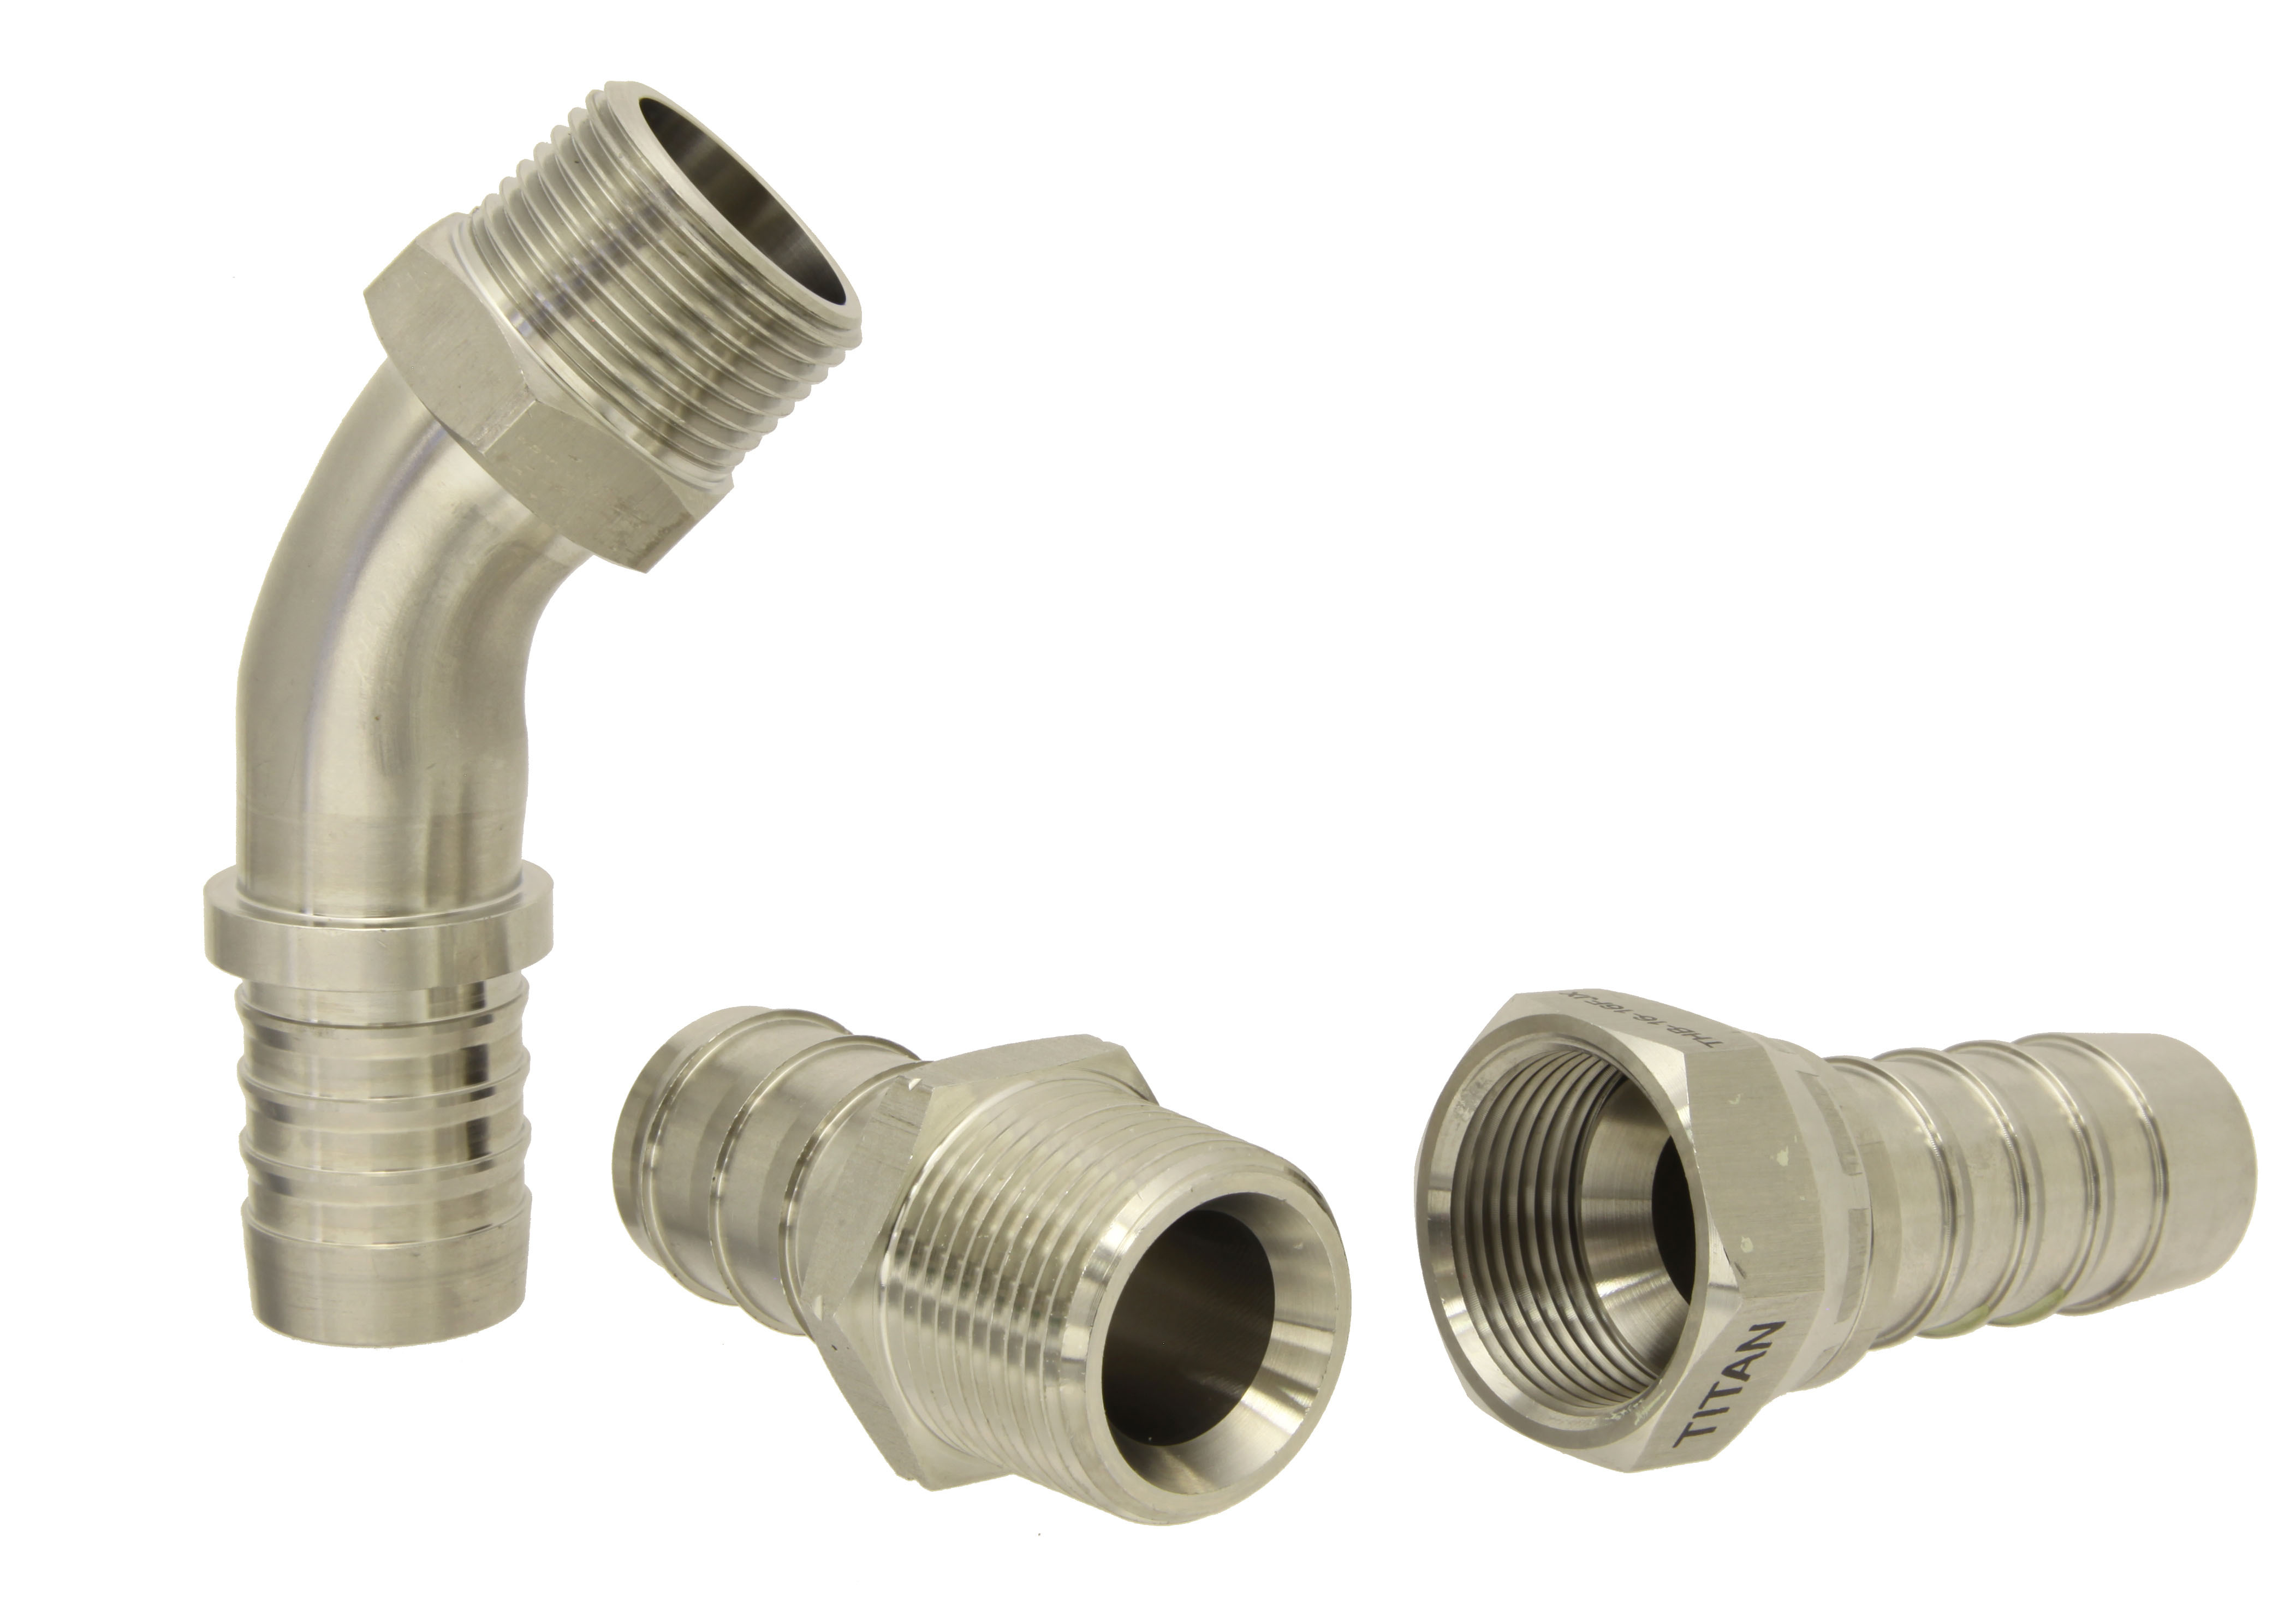 Photo showing Titan Hose Barb Fittings on white background